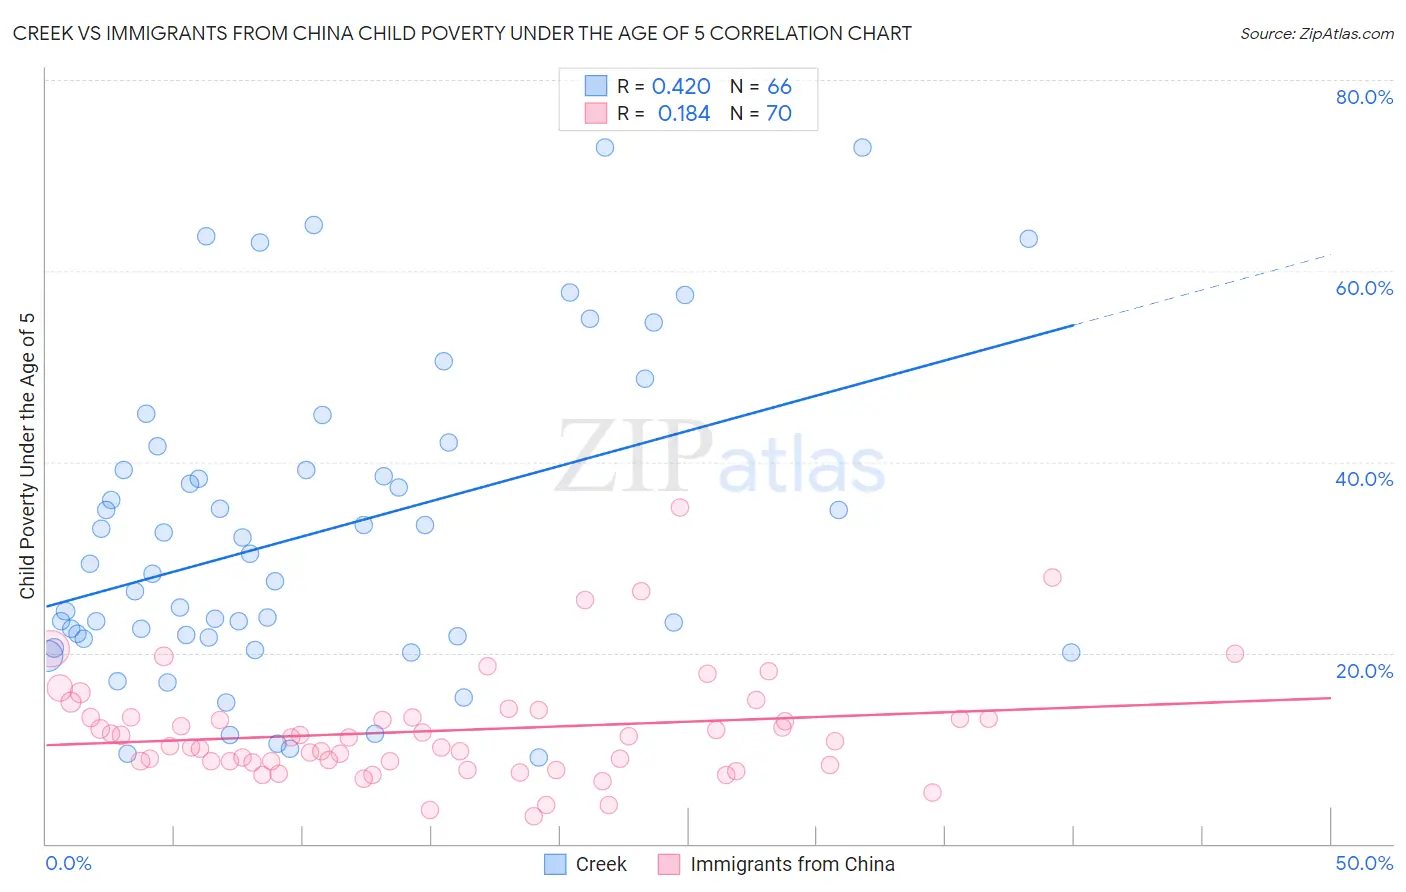 Creek vs Immigrants from China Child Poverty Under the Age of 5